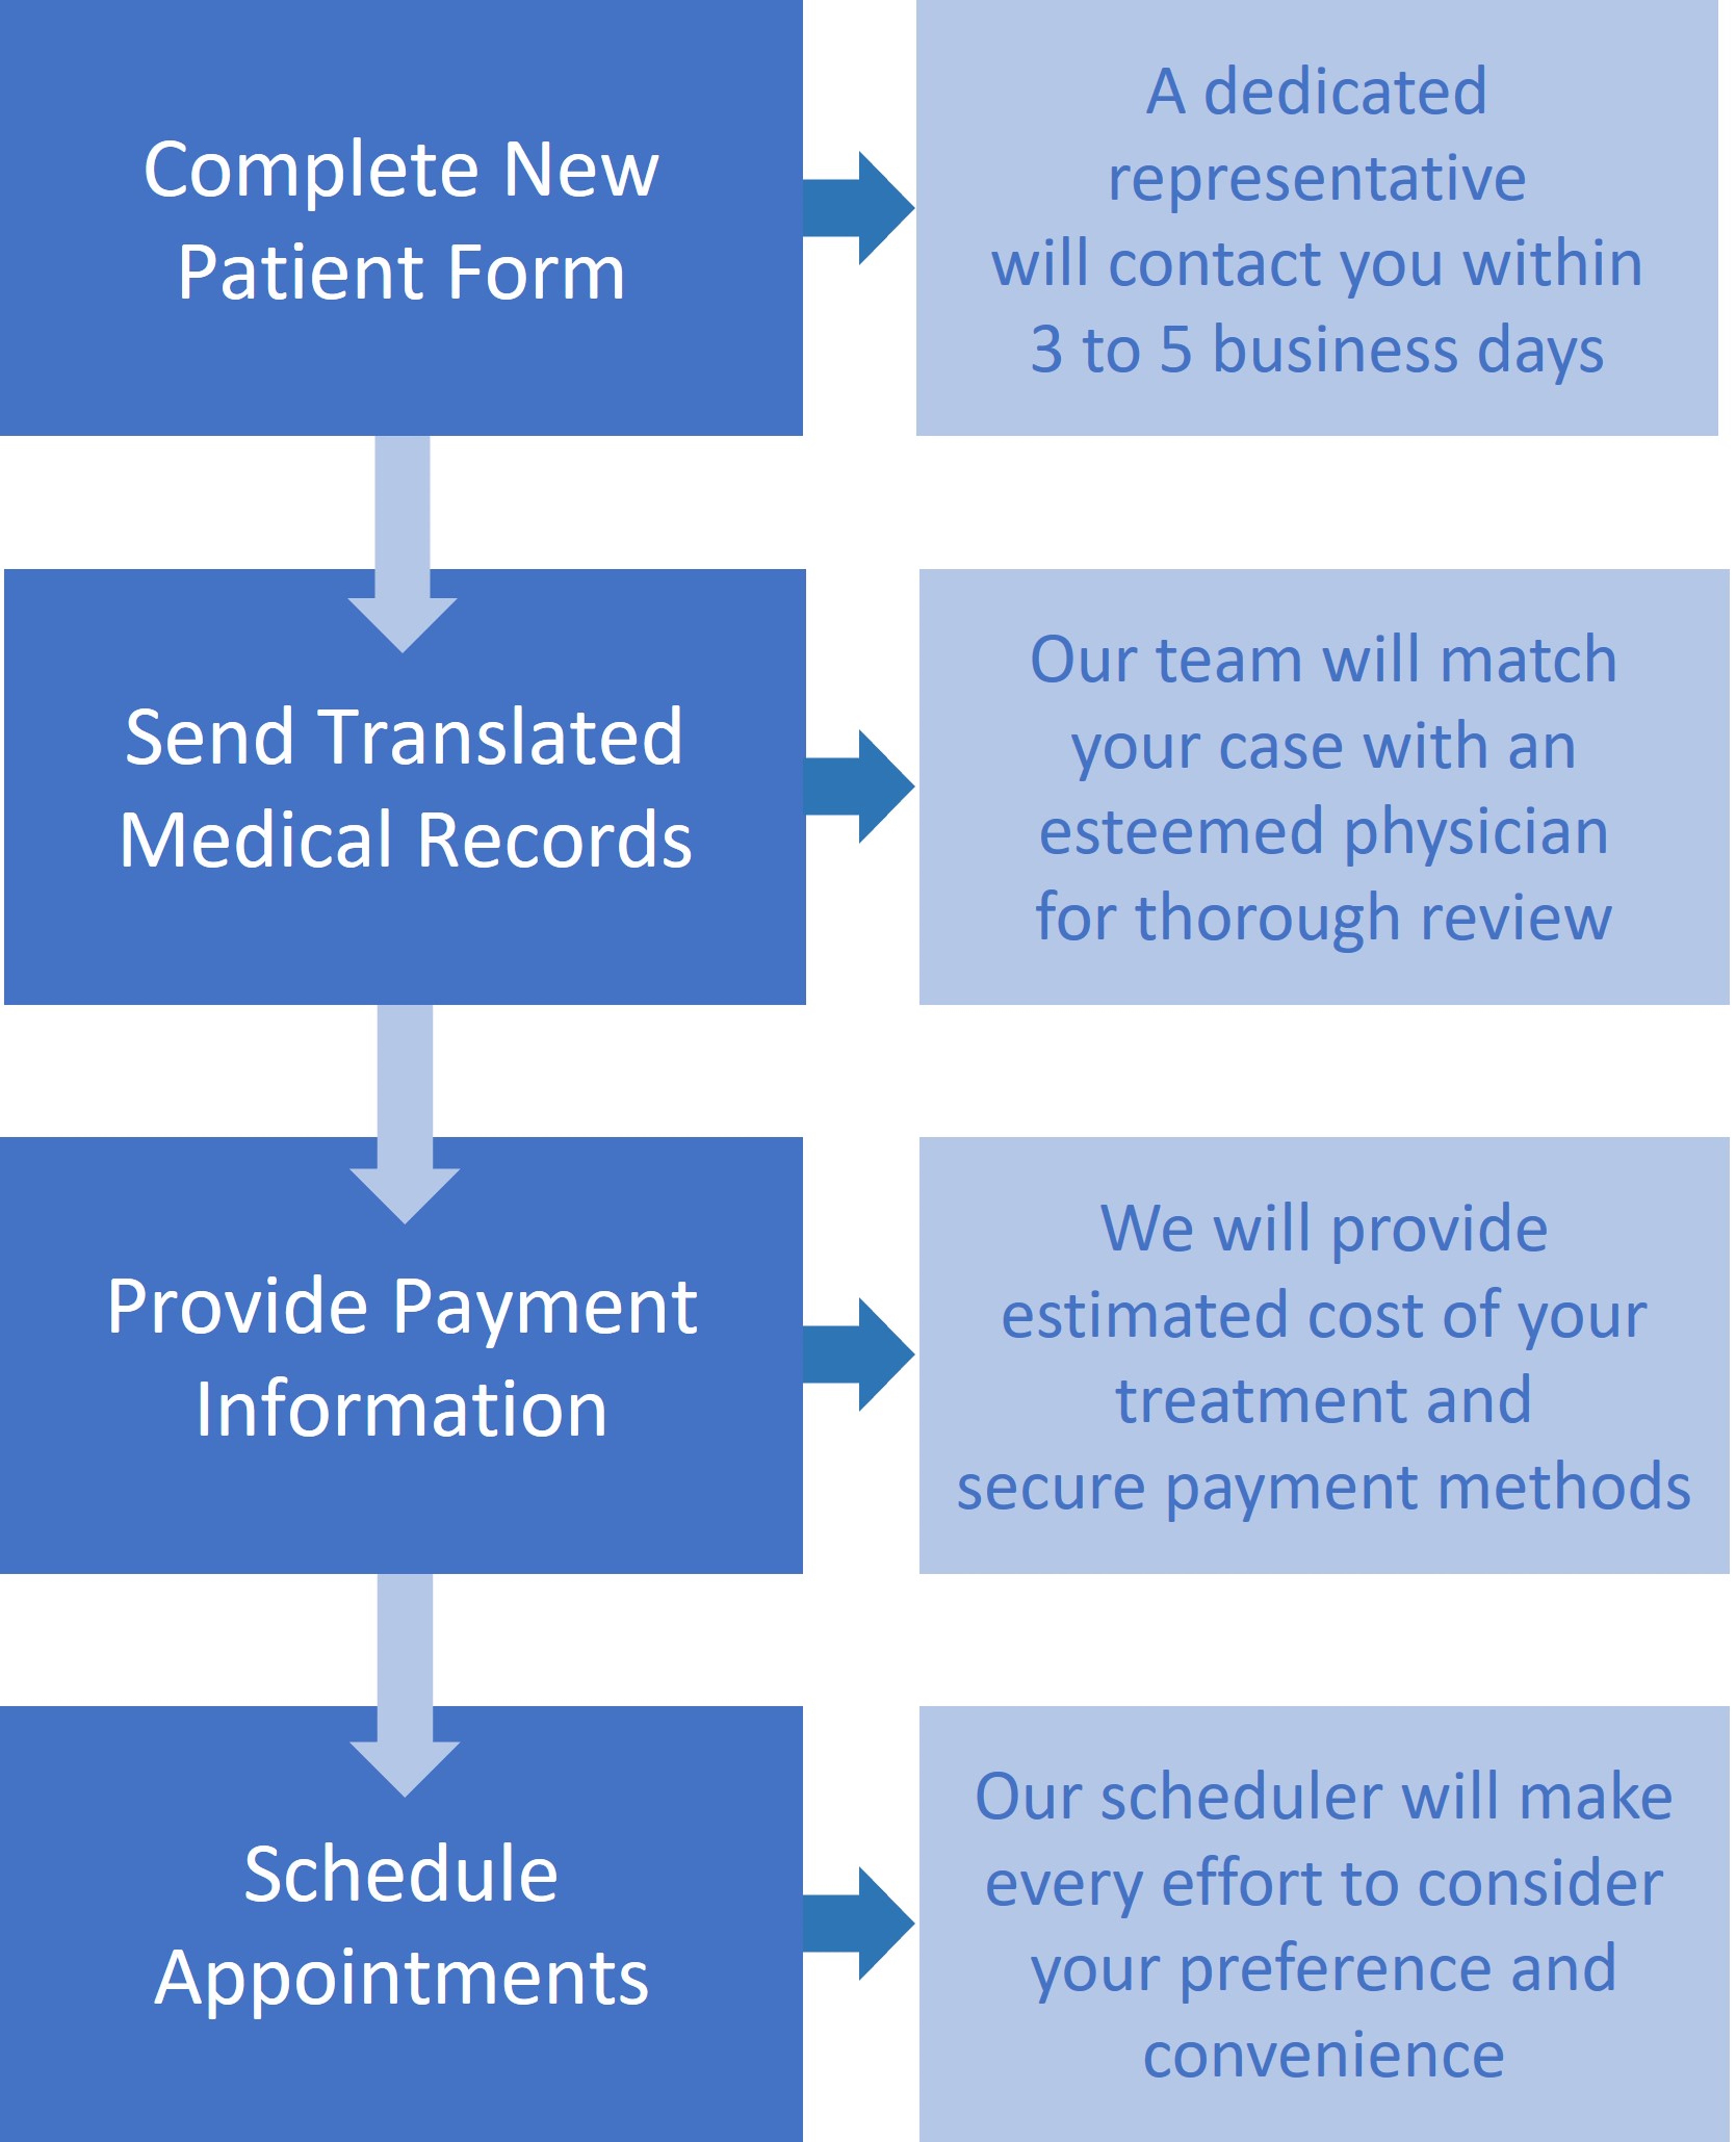 Complete new patient form, send translated medical records, provide payment information, schedule appointemnts